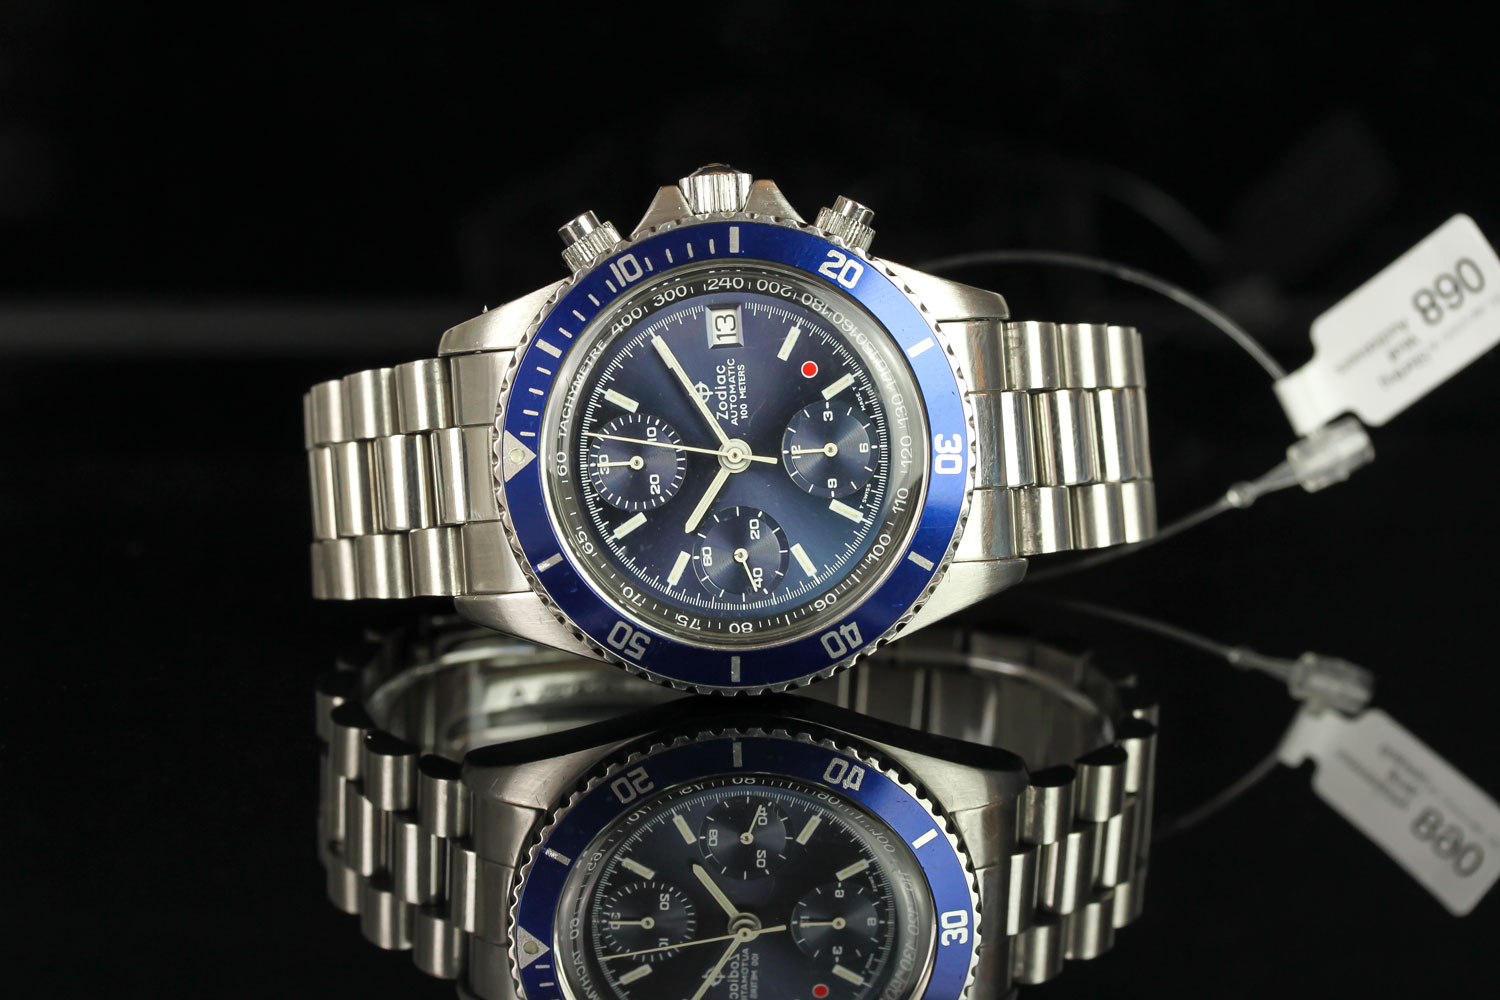 GENTLEMENS ZODIAC AUTOMATIC CHRONOGRAPH REF. 406.24.38, circular triple register blue dial with a